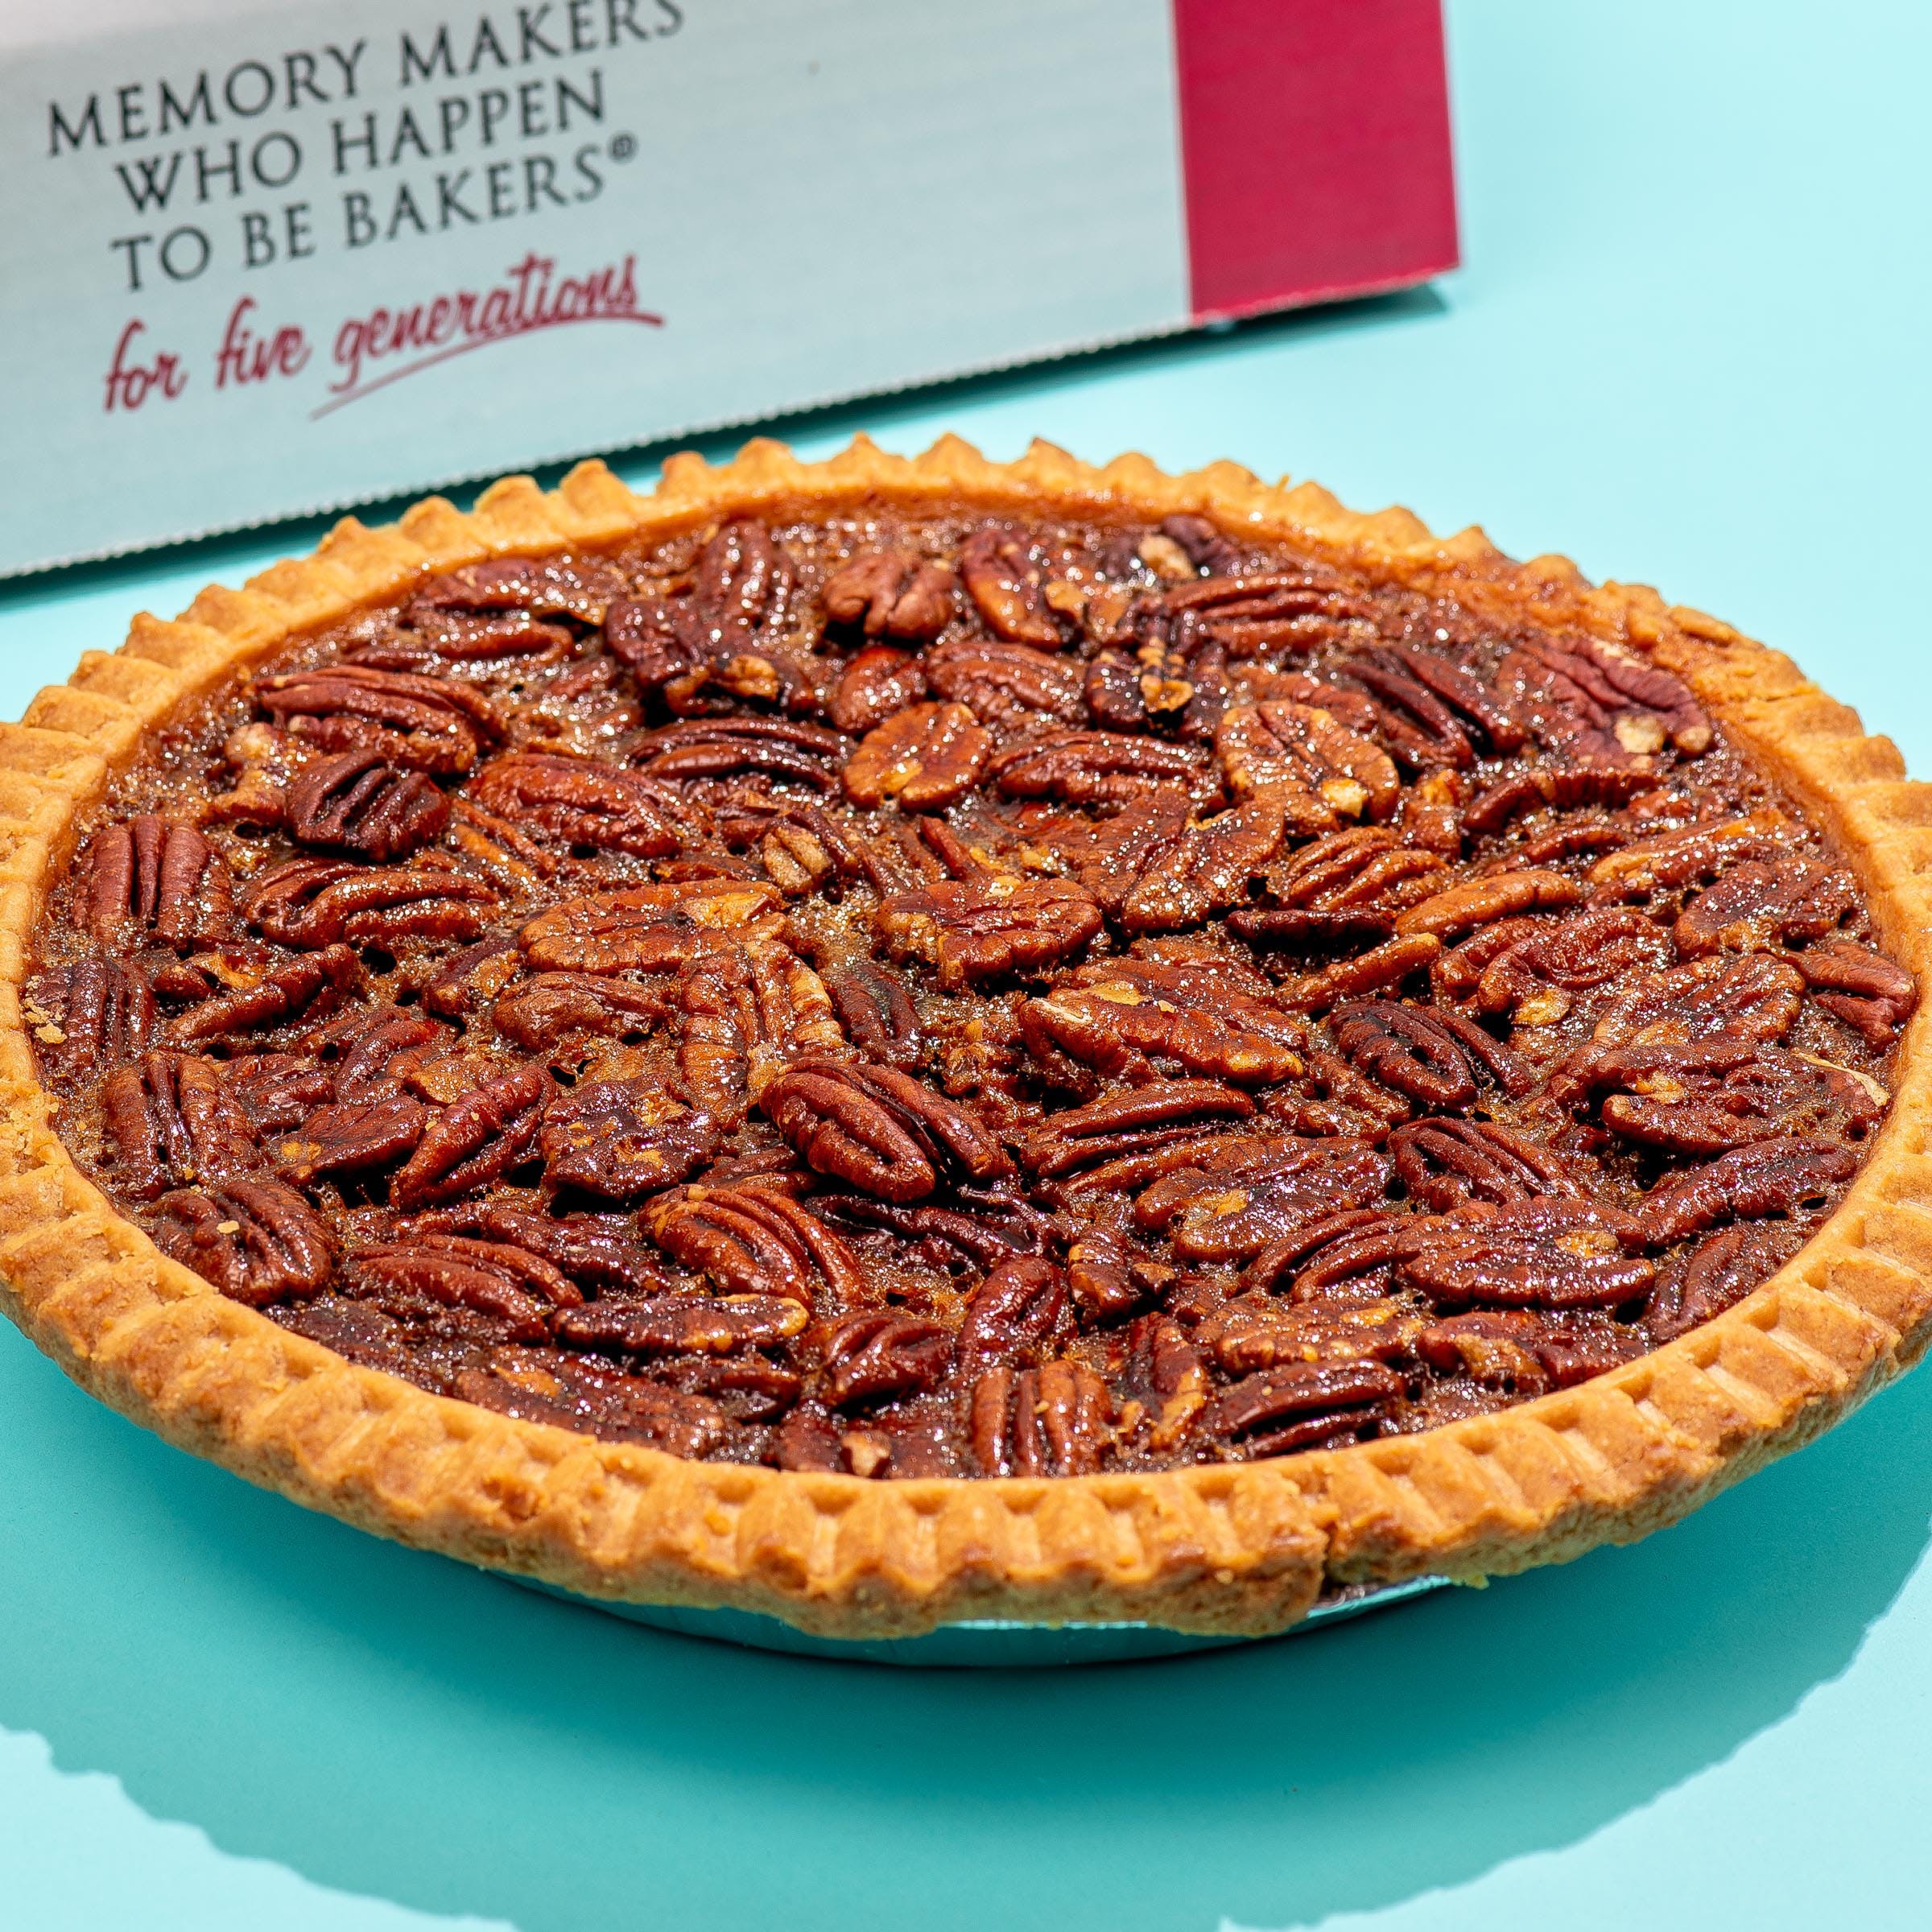 Texas Pecan Pie by Three Brothers Bakery